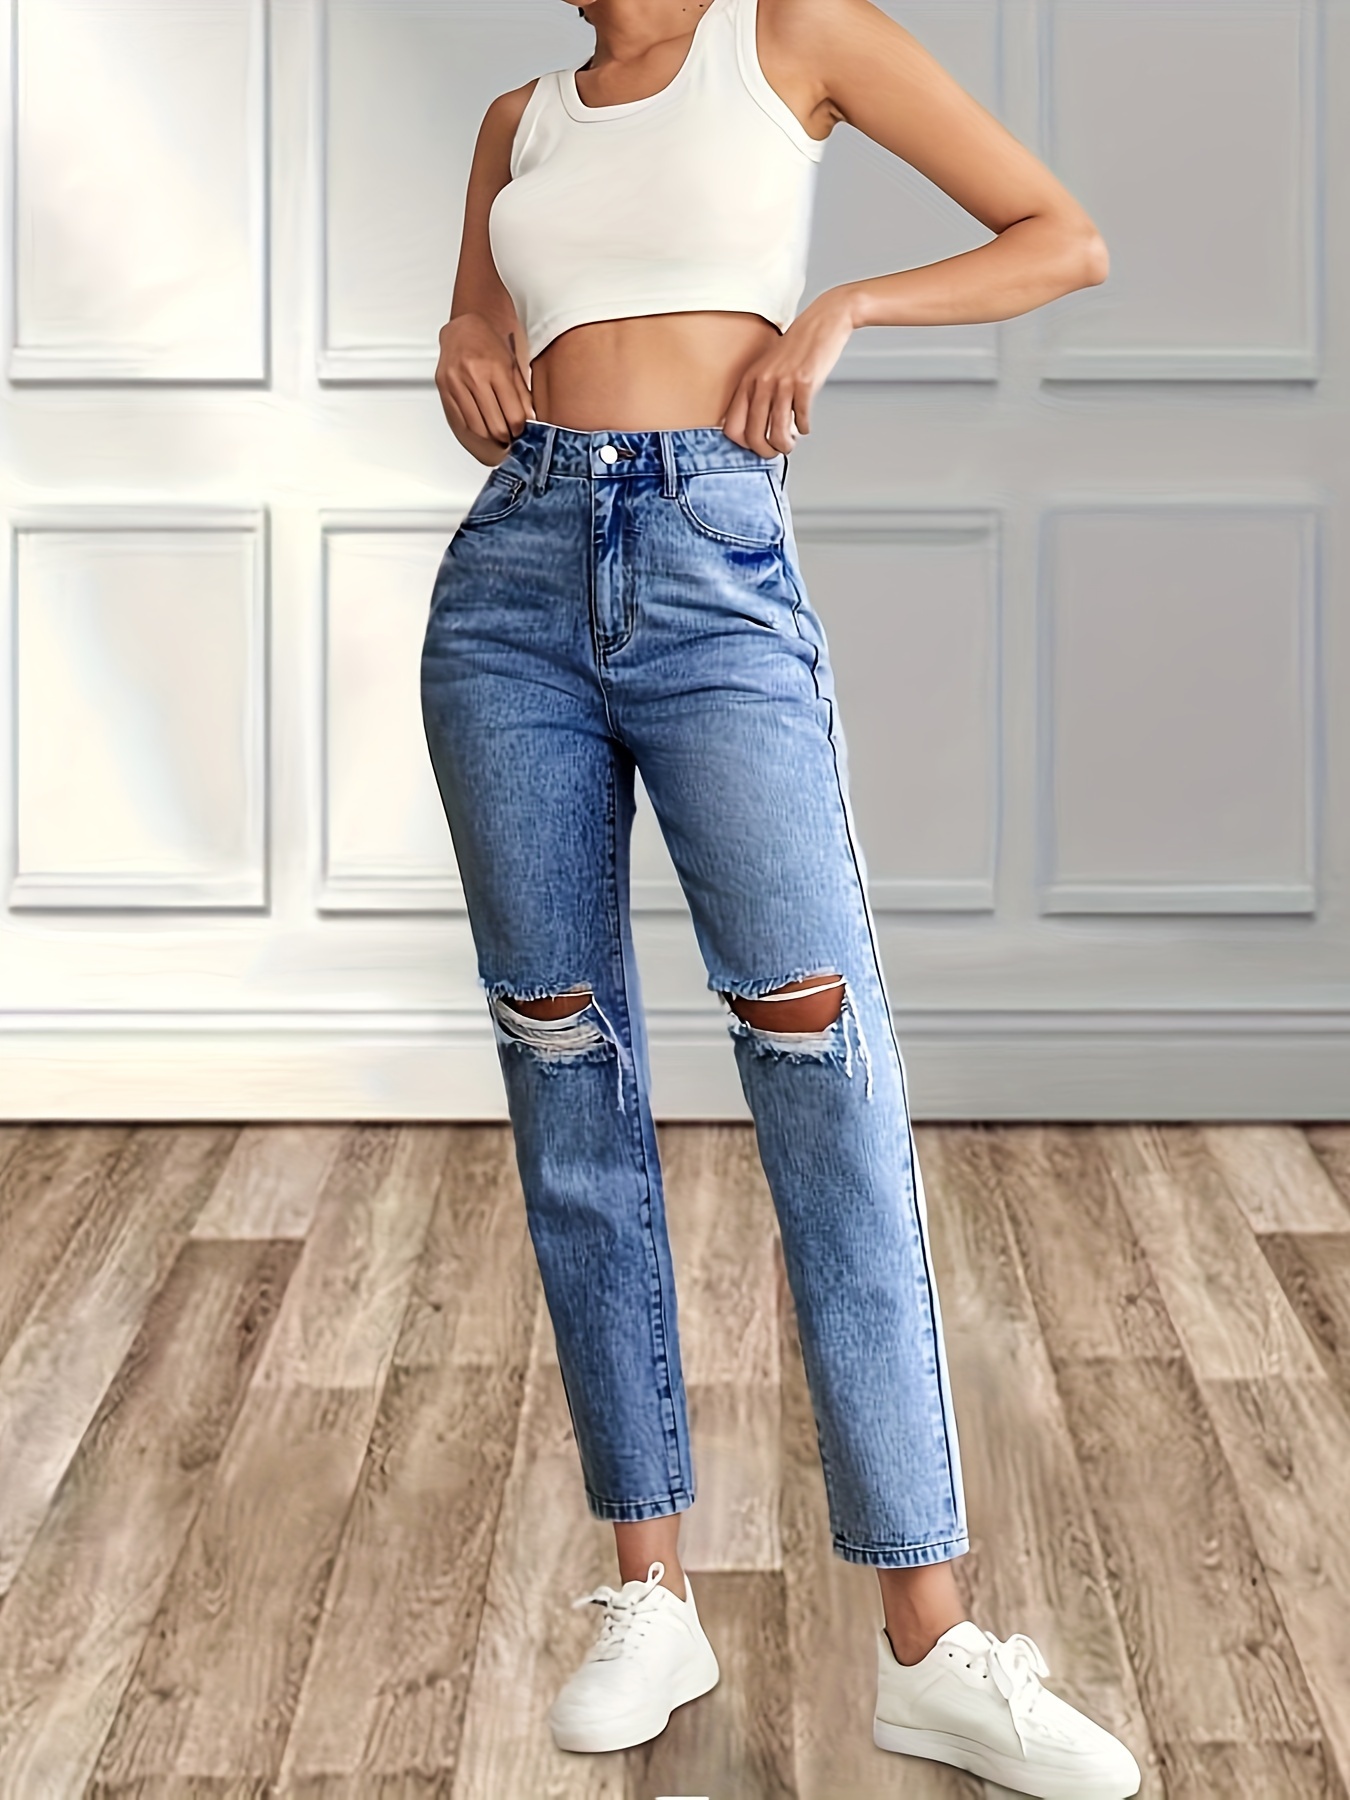 Women's Jeans Pants for Women Jeans for Women Ripped Cut Out